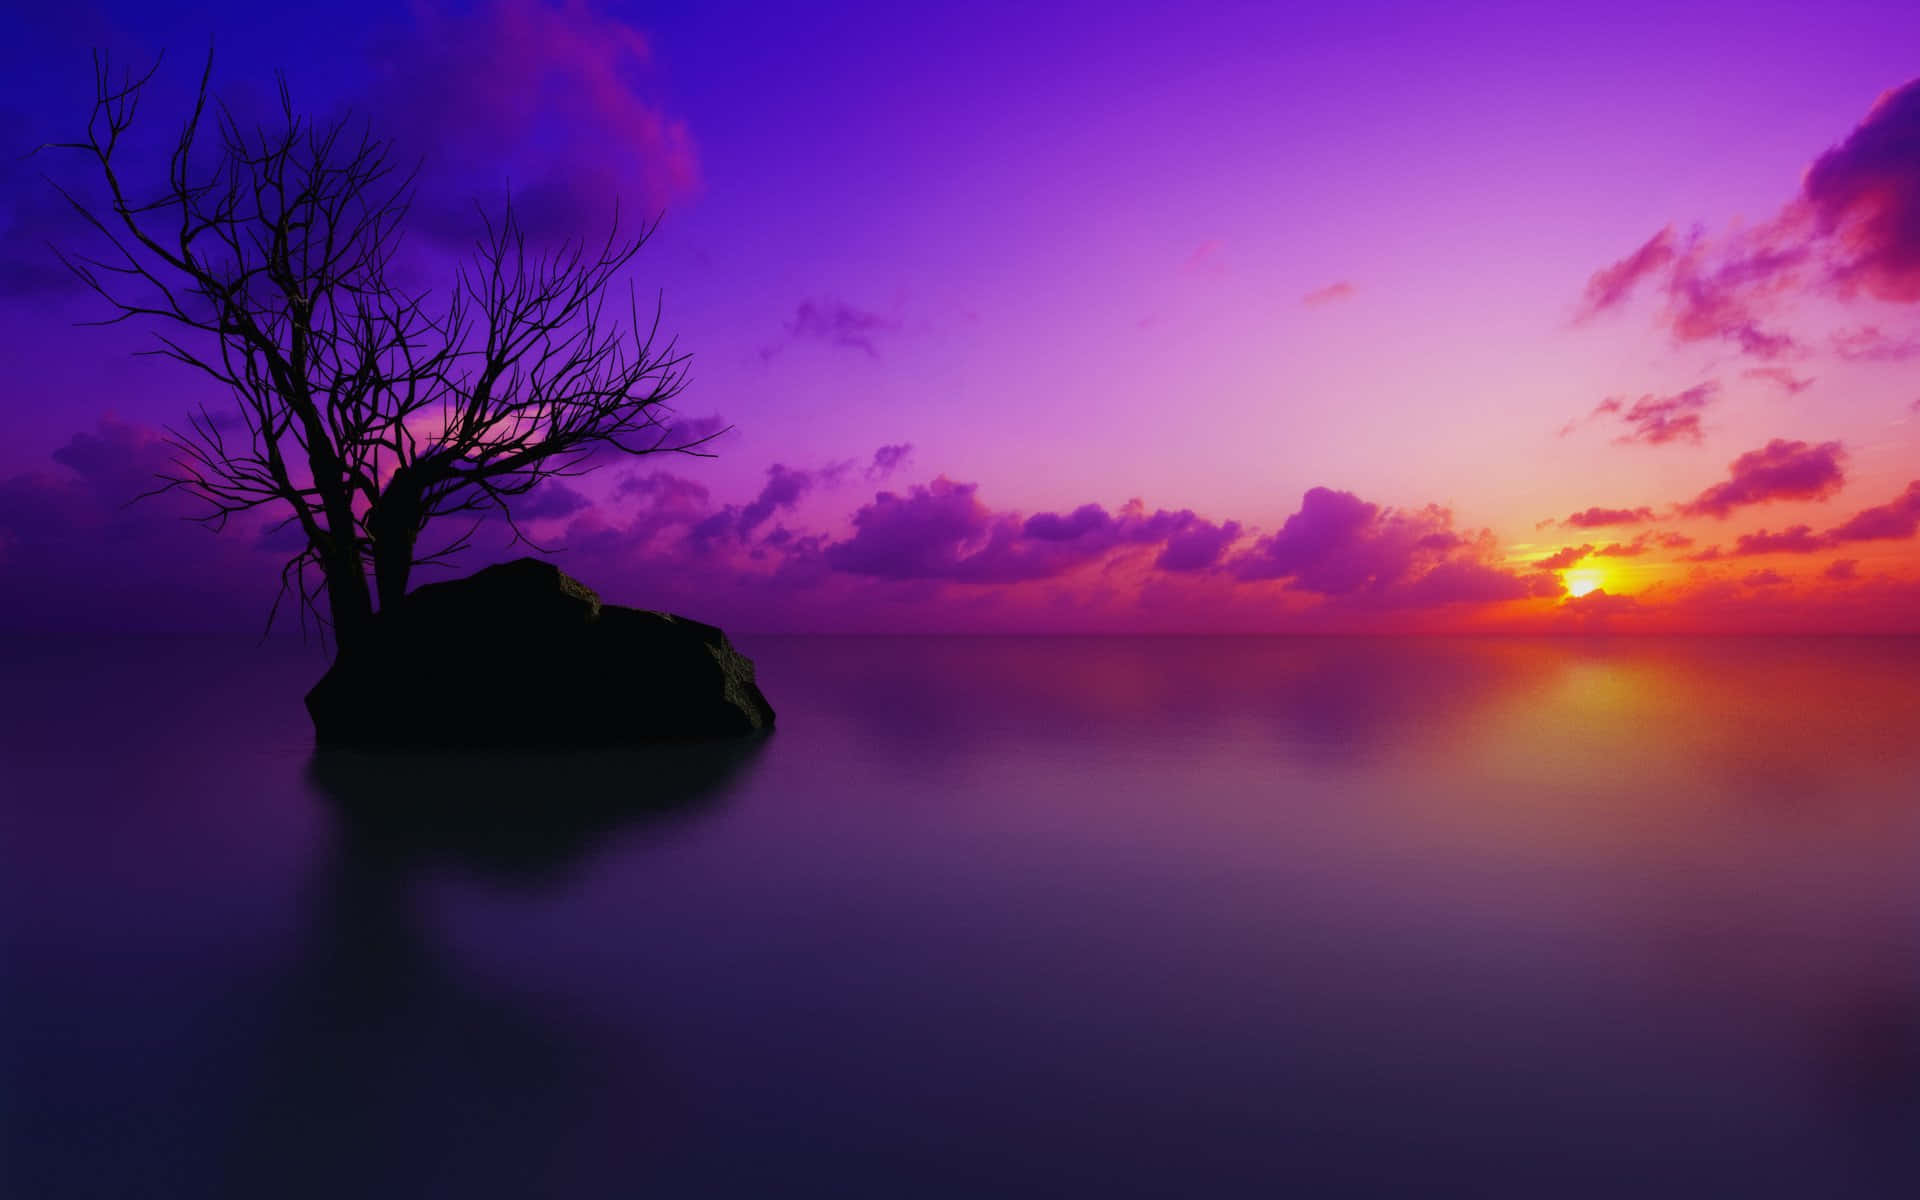 Sunset Reflection on Tranquil Waters Wallpaper